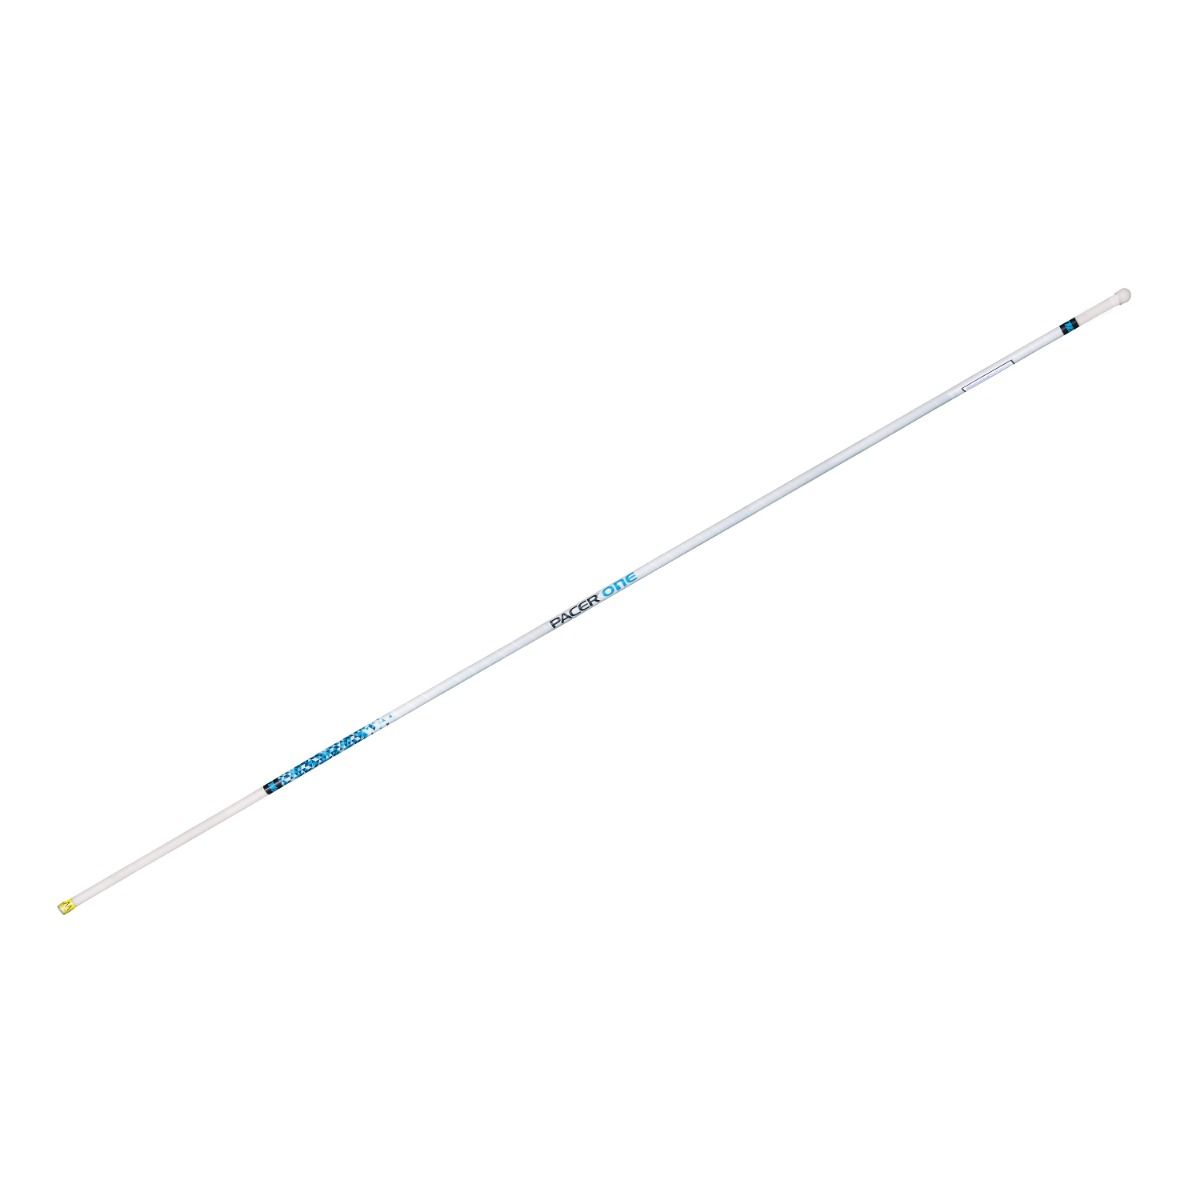 Gill 13' Pacer One Vaulting Pole